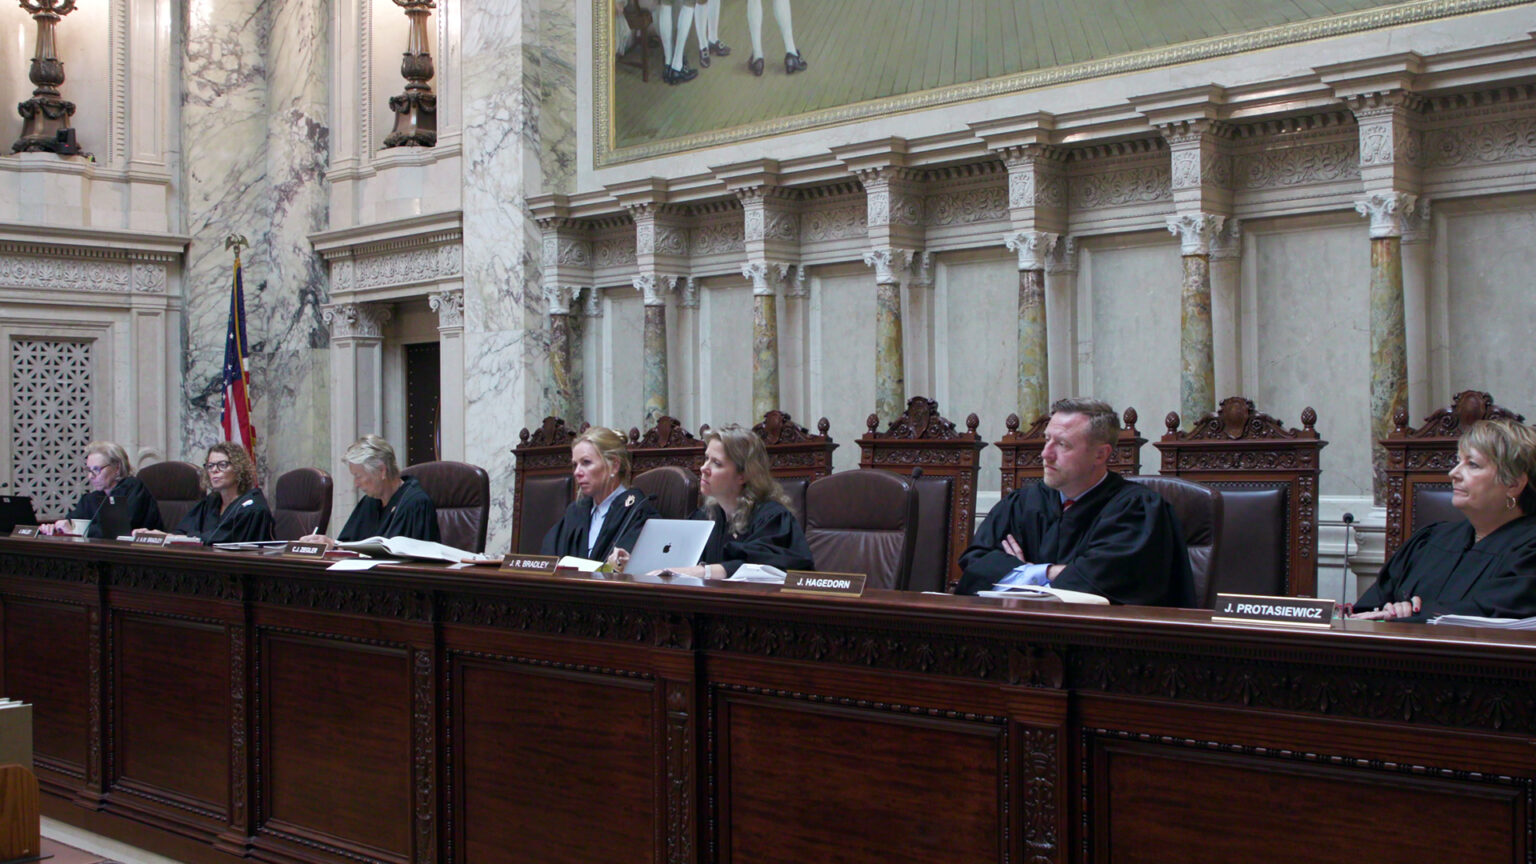 From left to right, Jill Karofsky, Rebecca Dallet, Ann Walsh Bradley Annette Ziegler, Rebecca Bradley, Brian Hagedorn and Janet Protasiewicz sit at a judicial dais in a row of high-backed leather chairs behind them, with another row of high-backed wood and leather chairs behind them, in a room with marble masonry, a U.S. flag and a large painting.